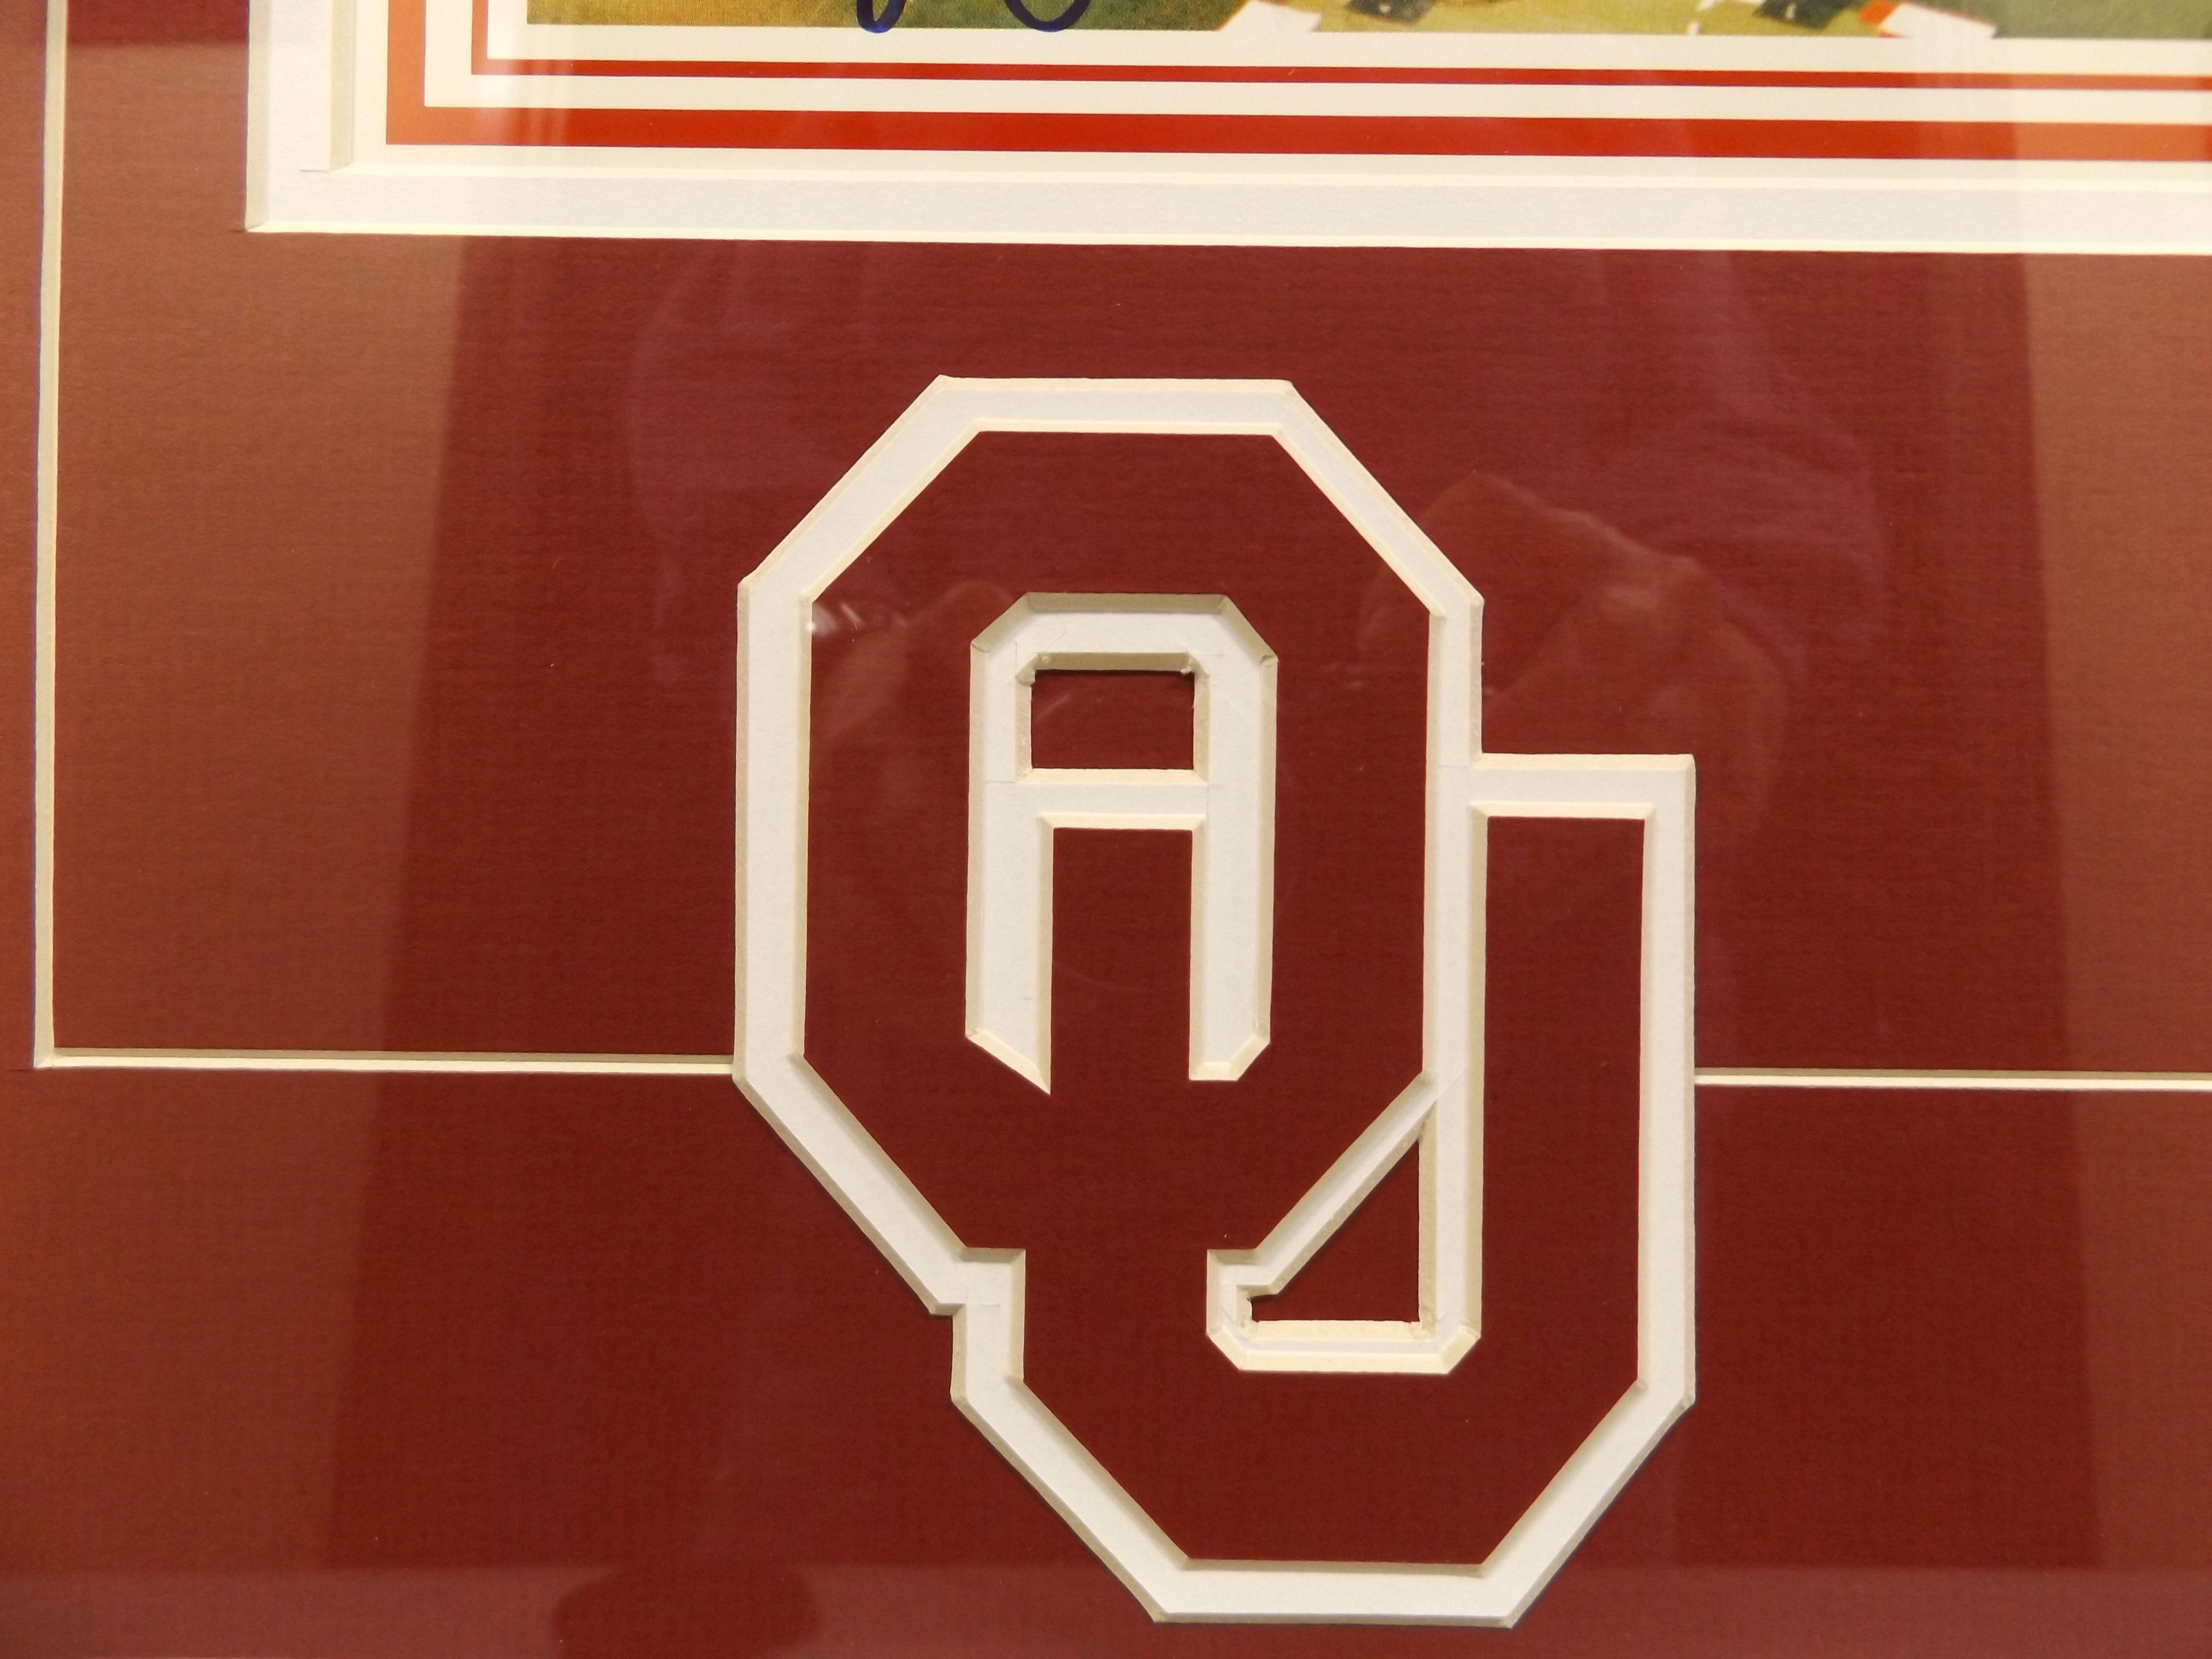 Matted/Framed OU Player Signature/Stadium Picture